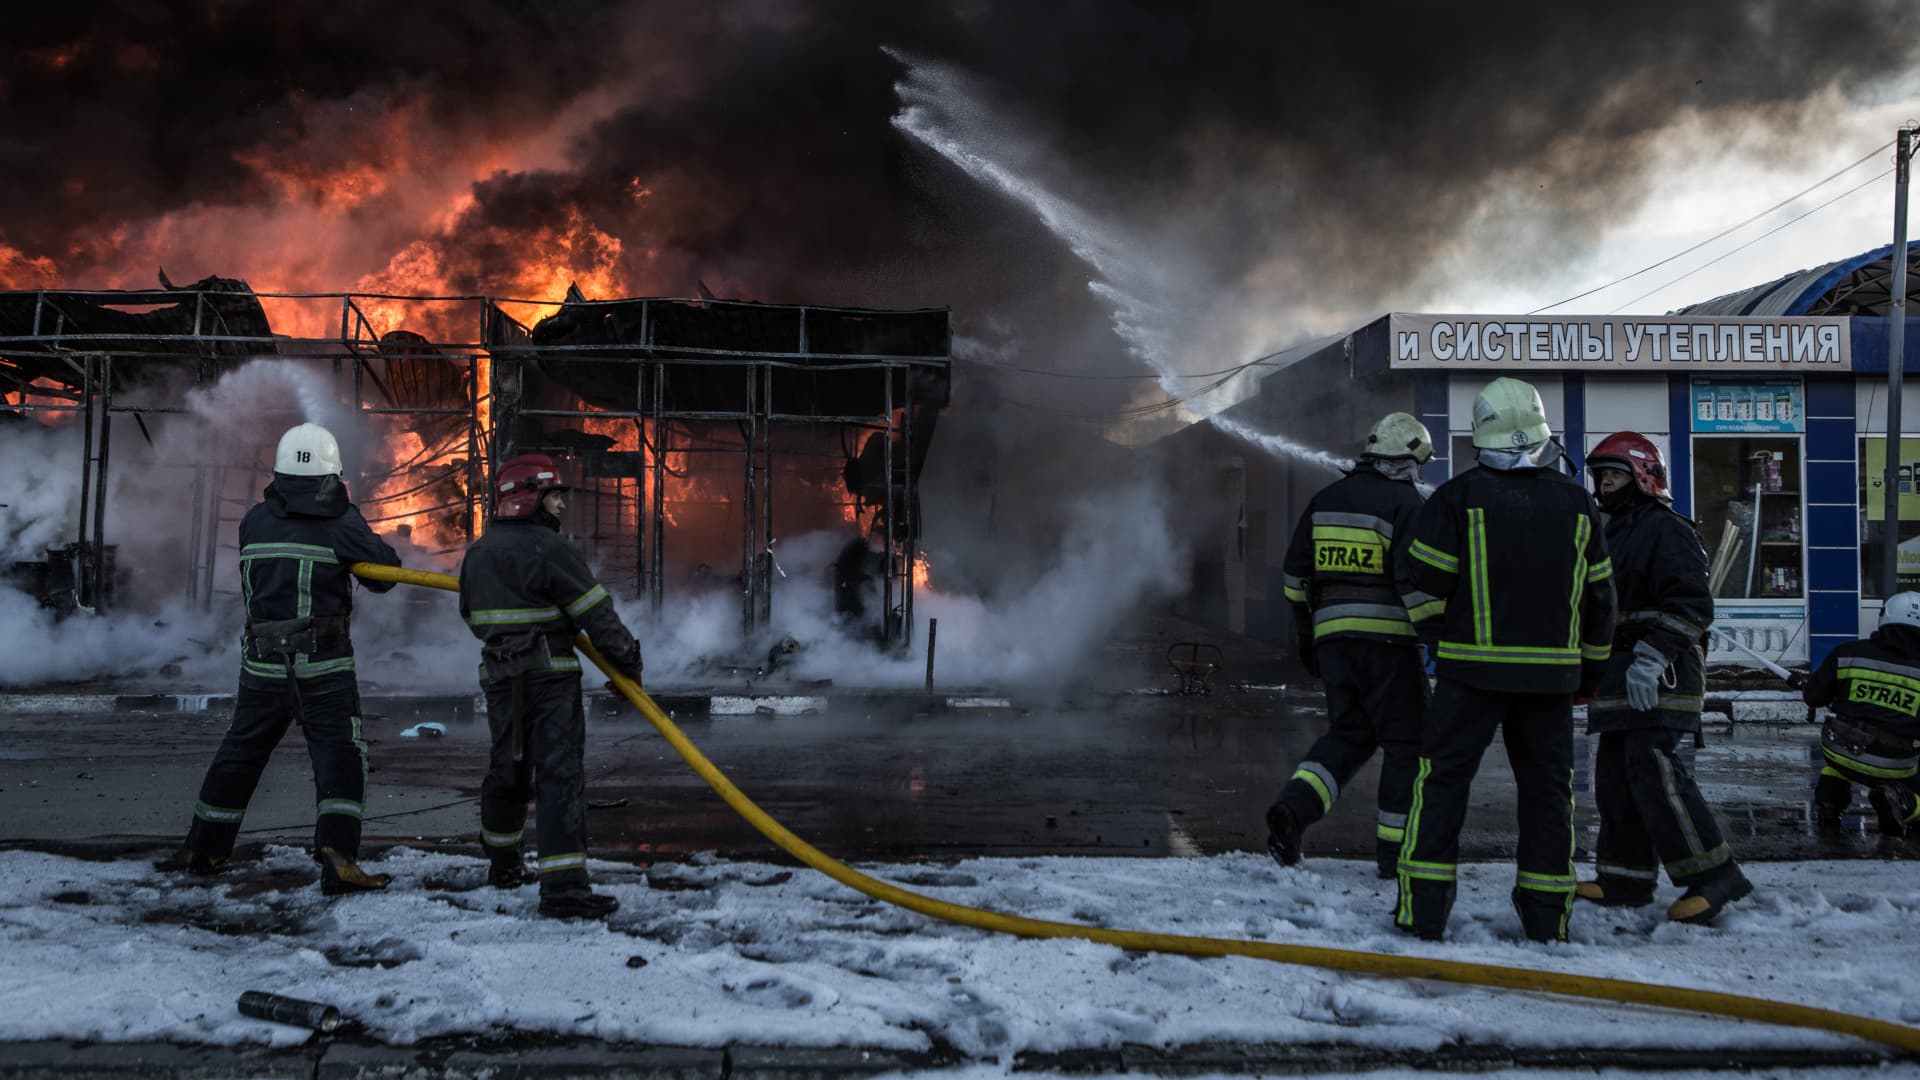 Firefighters try to extinguish a fire broke out at the Saltivka construction market, hit by 6 rounds of Russian heavy artillery in Kharkiv, Ukraine on March 16, 2022.